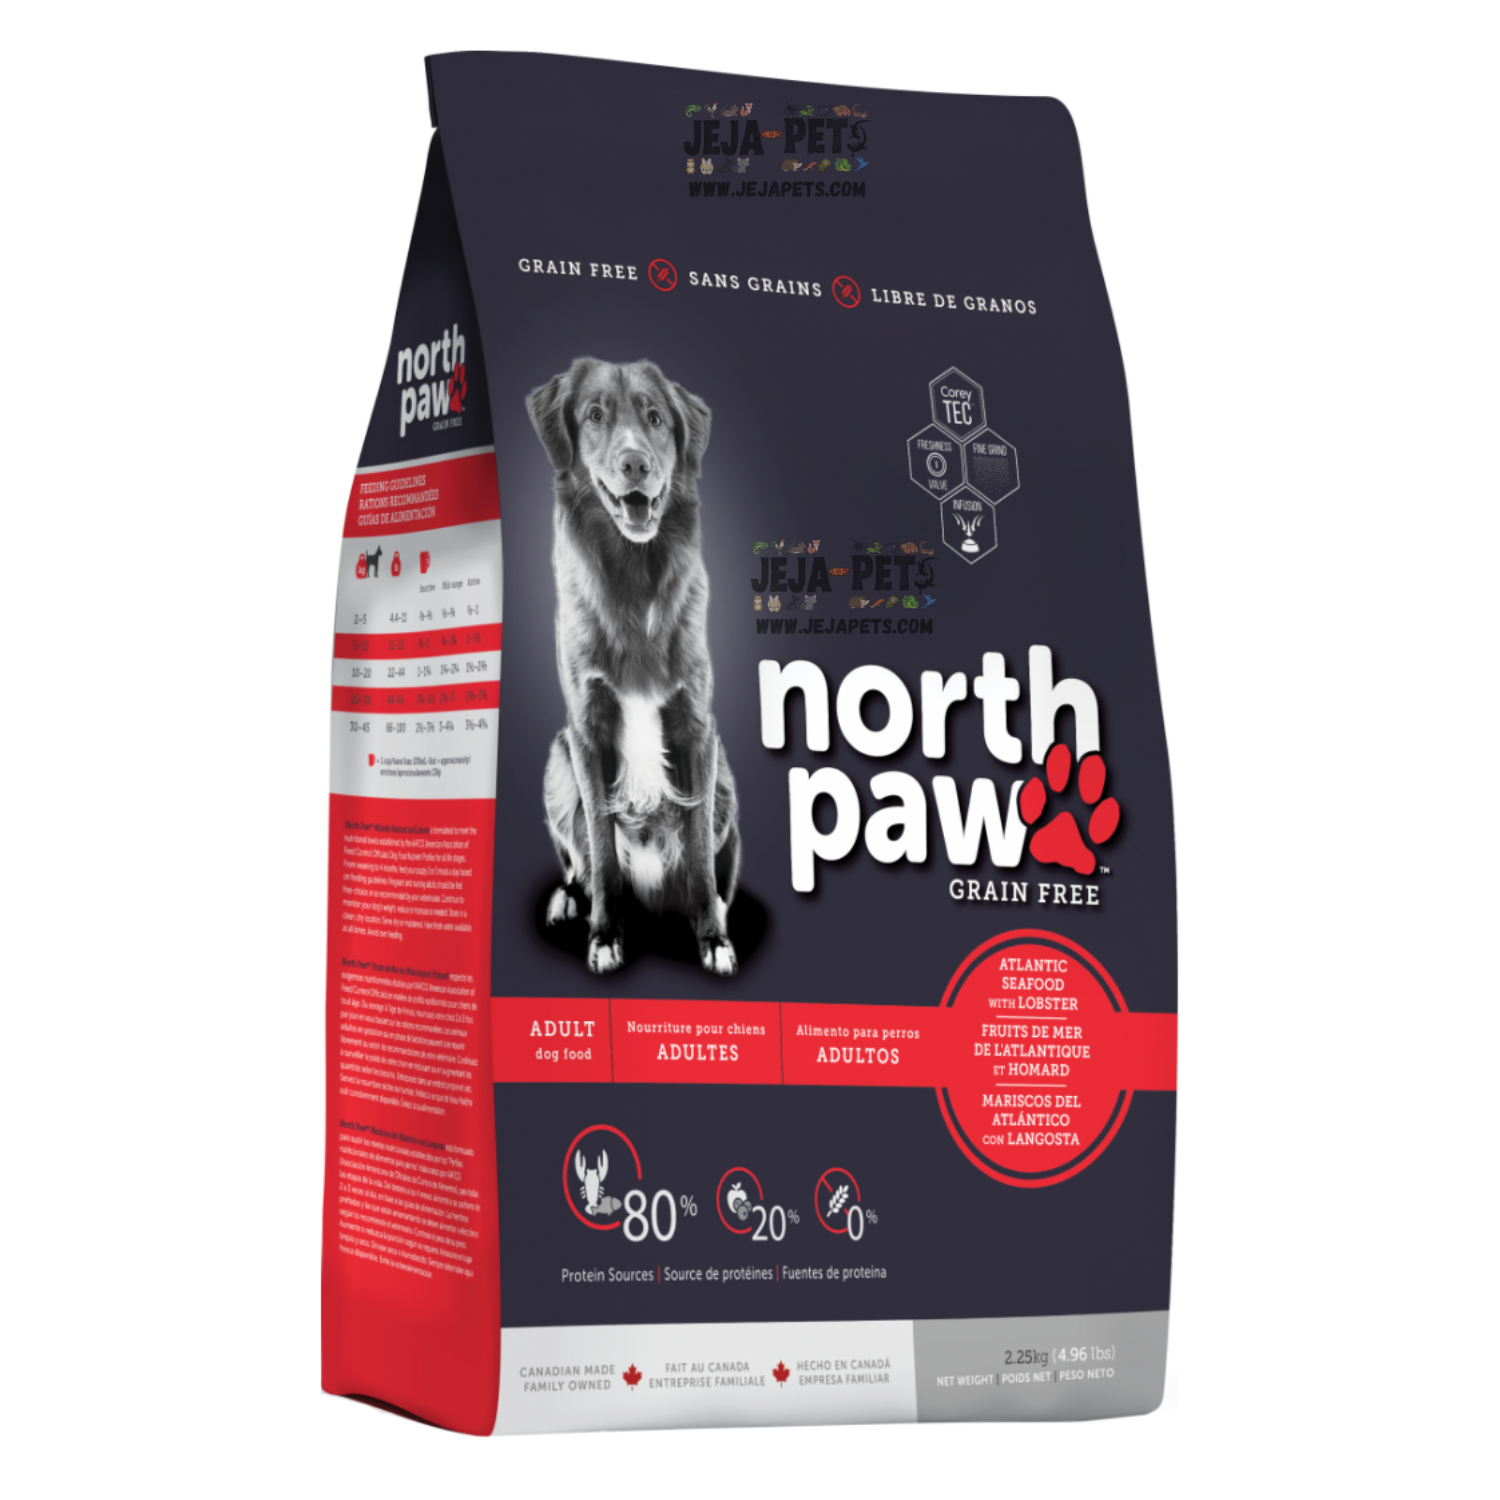 [DISCONTINUED] North Paw Atlantic Seafood with Lobster (Fish & Lobster Dog Food) - 2.25kg / 11.39kg